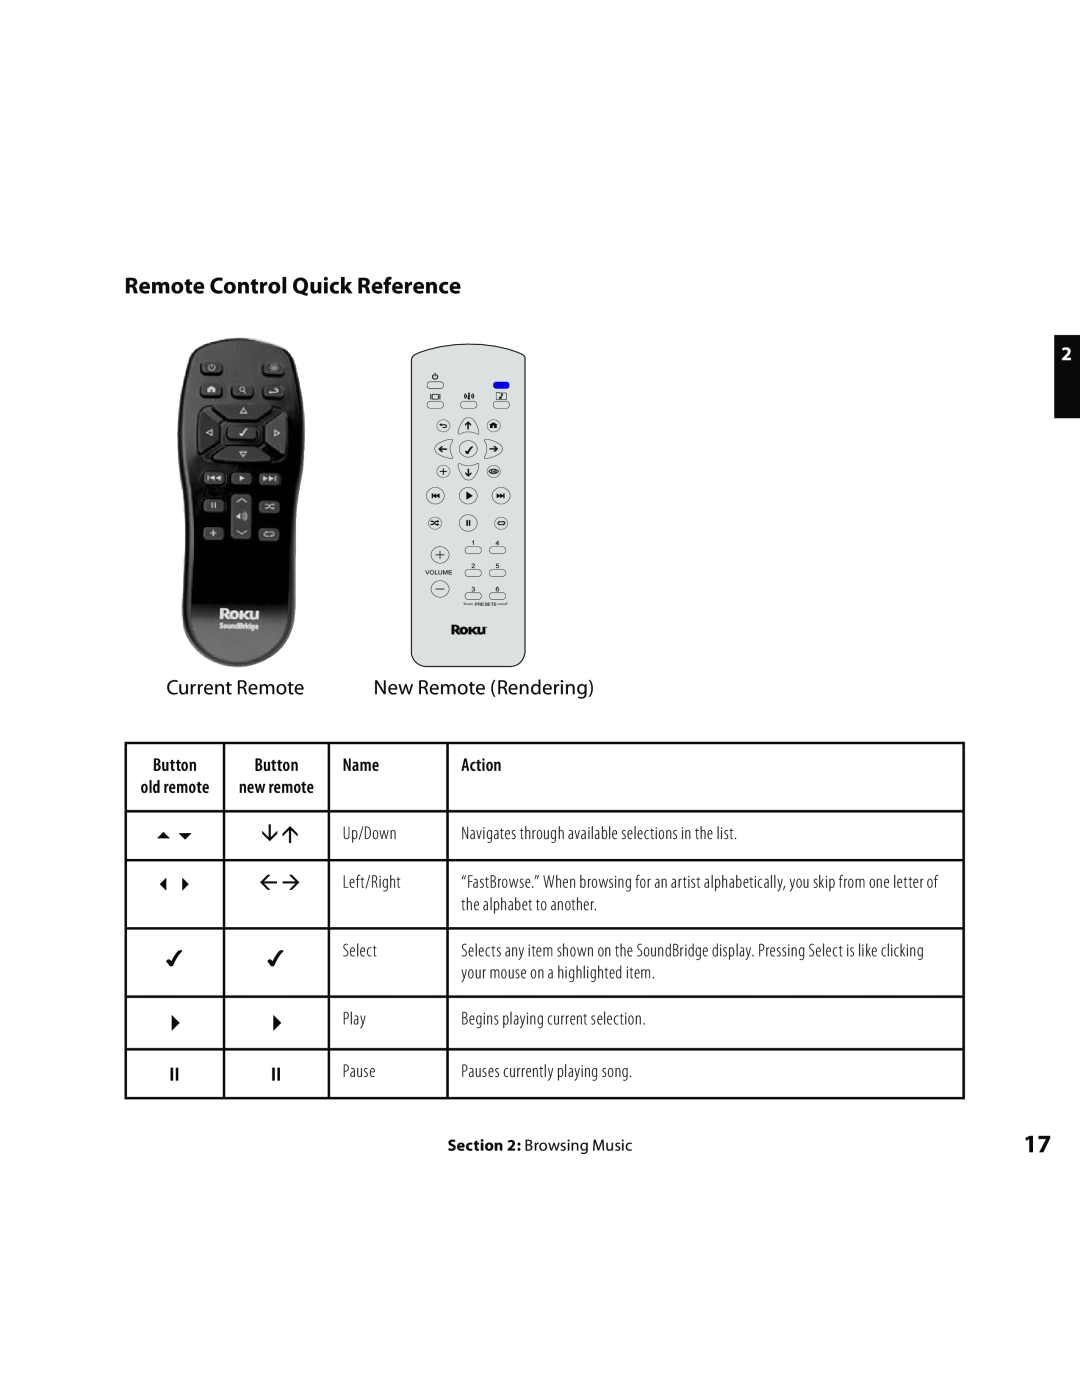 Roku Music Player manual Remote Control Quick Reference, Current Remote, New Remote Rendering, Name, Action 